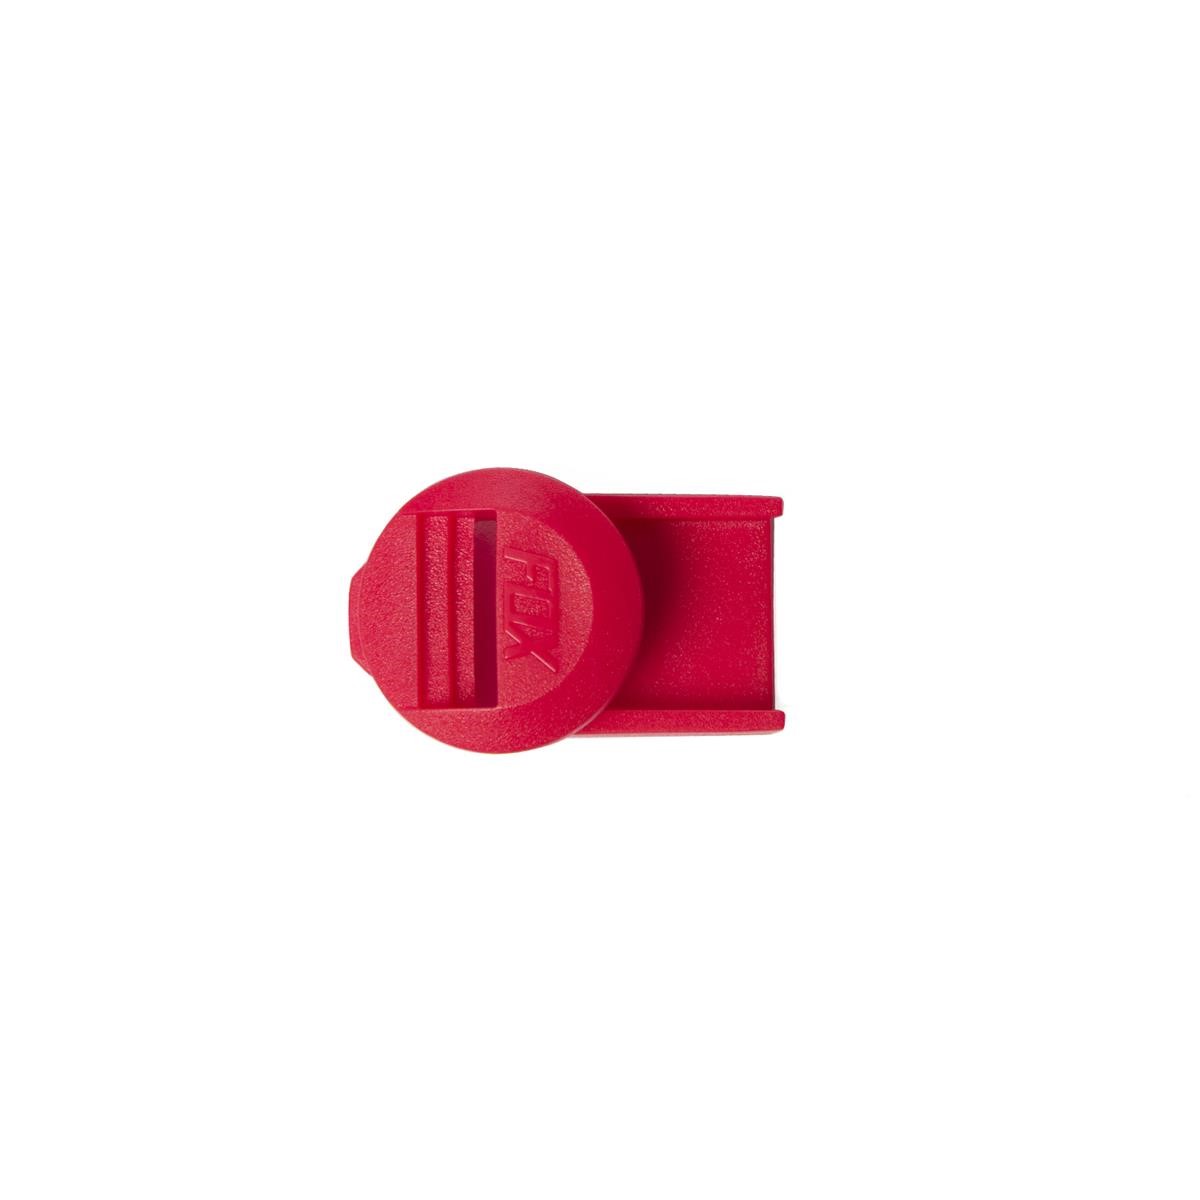 Fox Replacement Strap Holder Instinct/Comp 8/Bomber Red/White